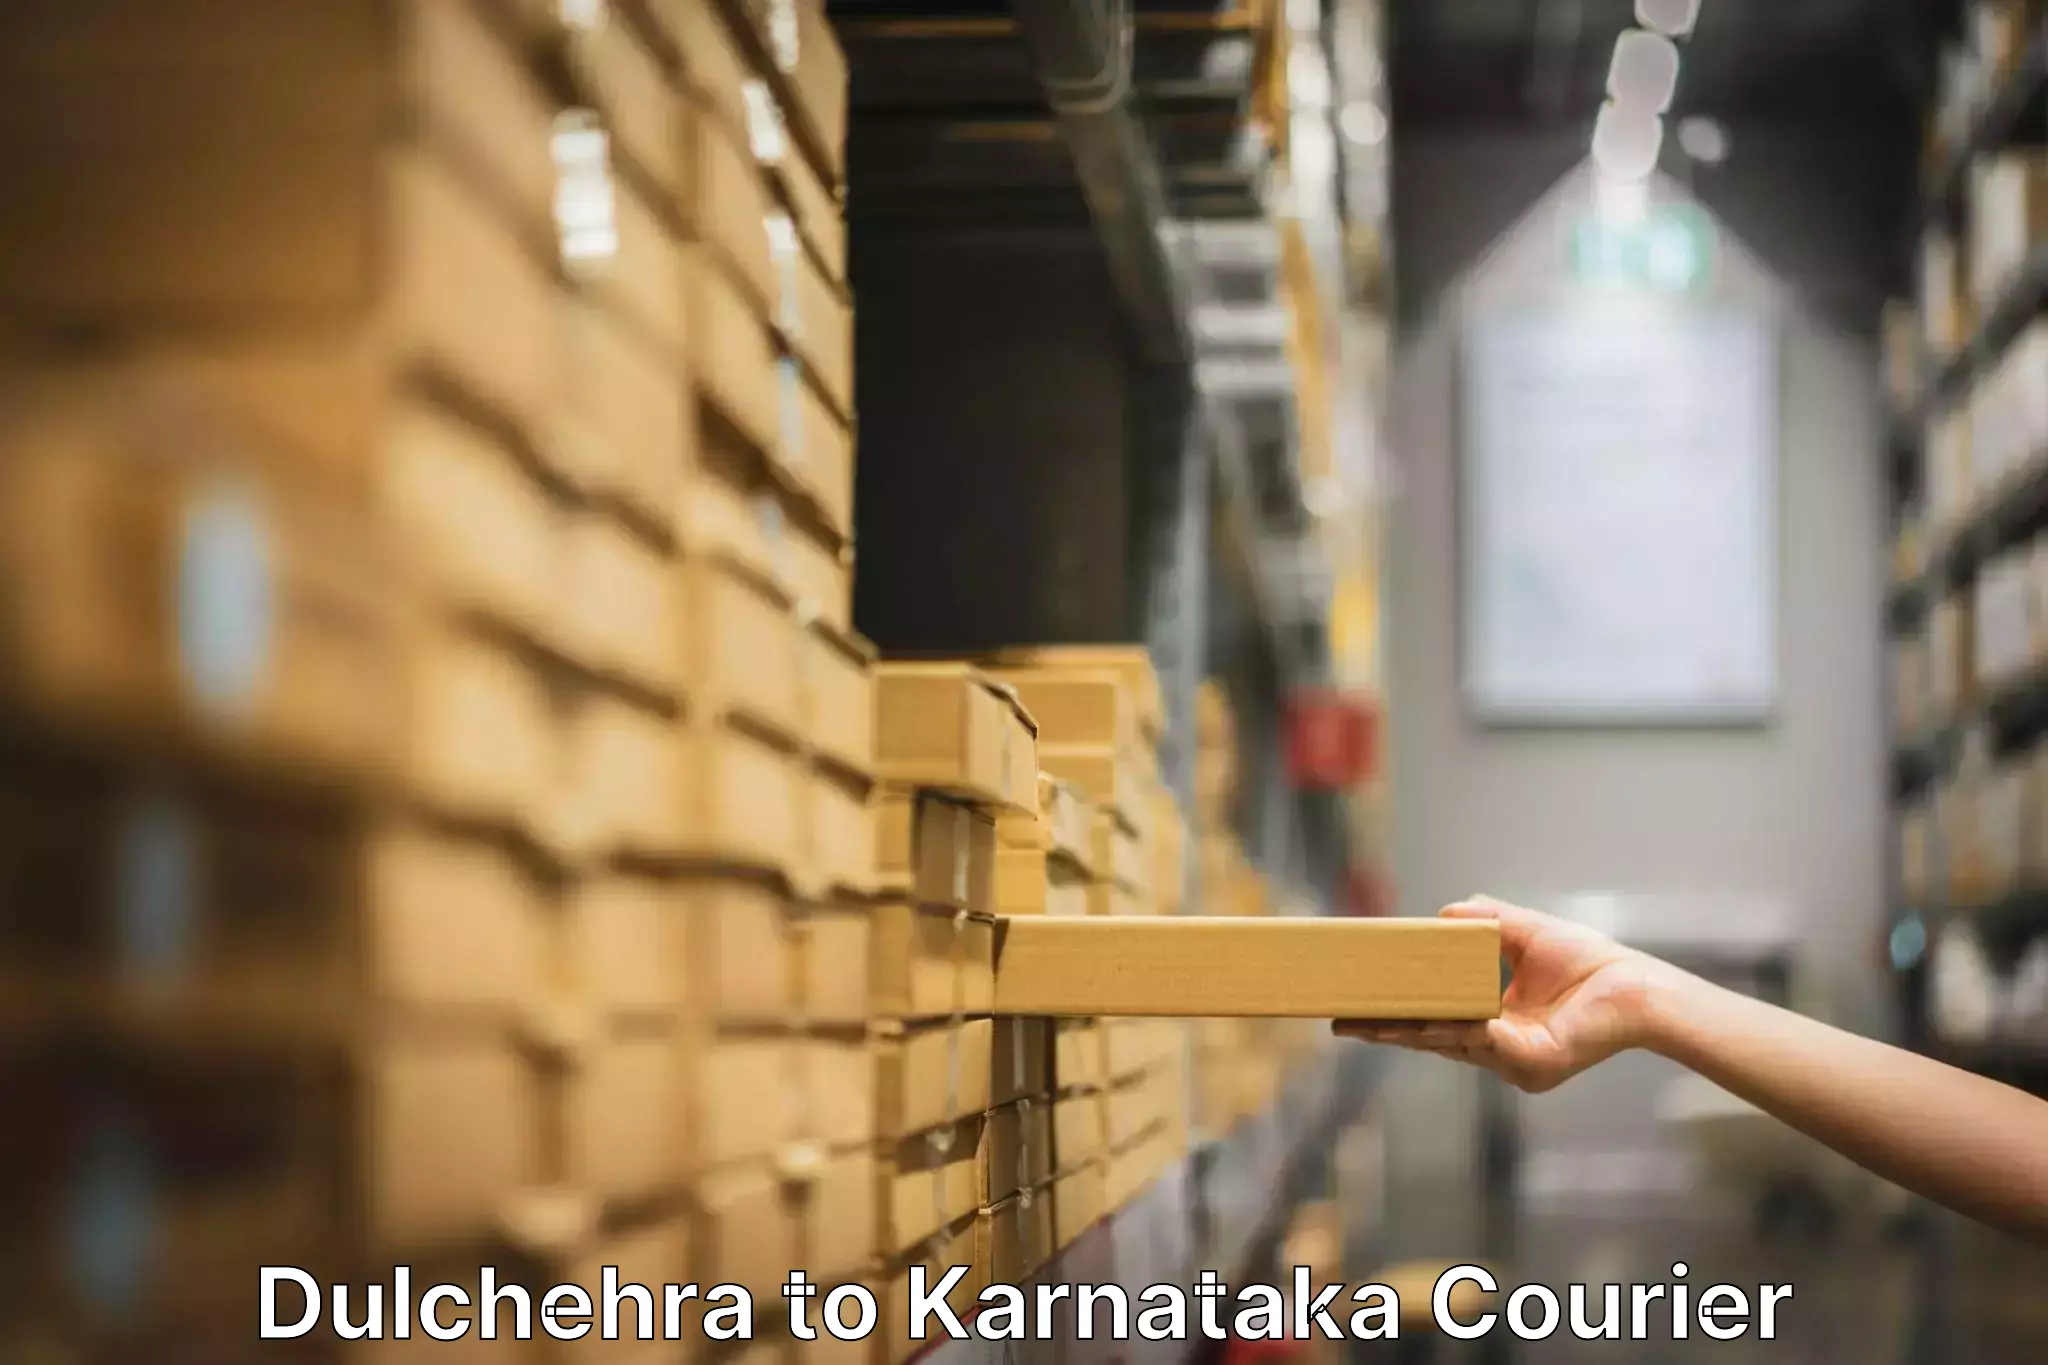 Moving and packing experts Dulchehra to Kollegal